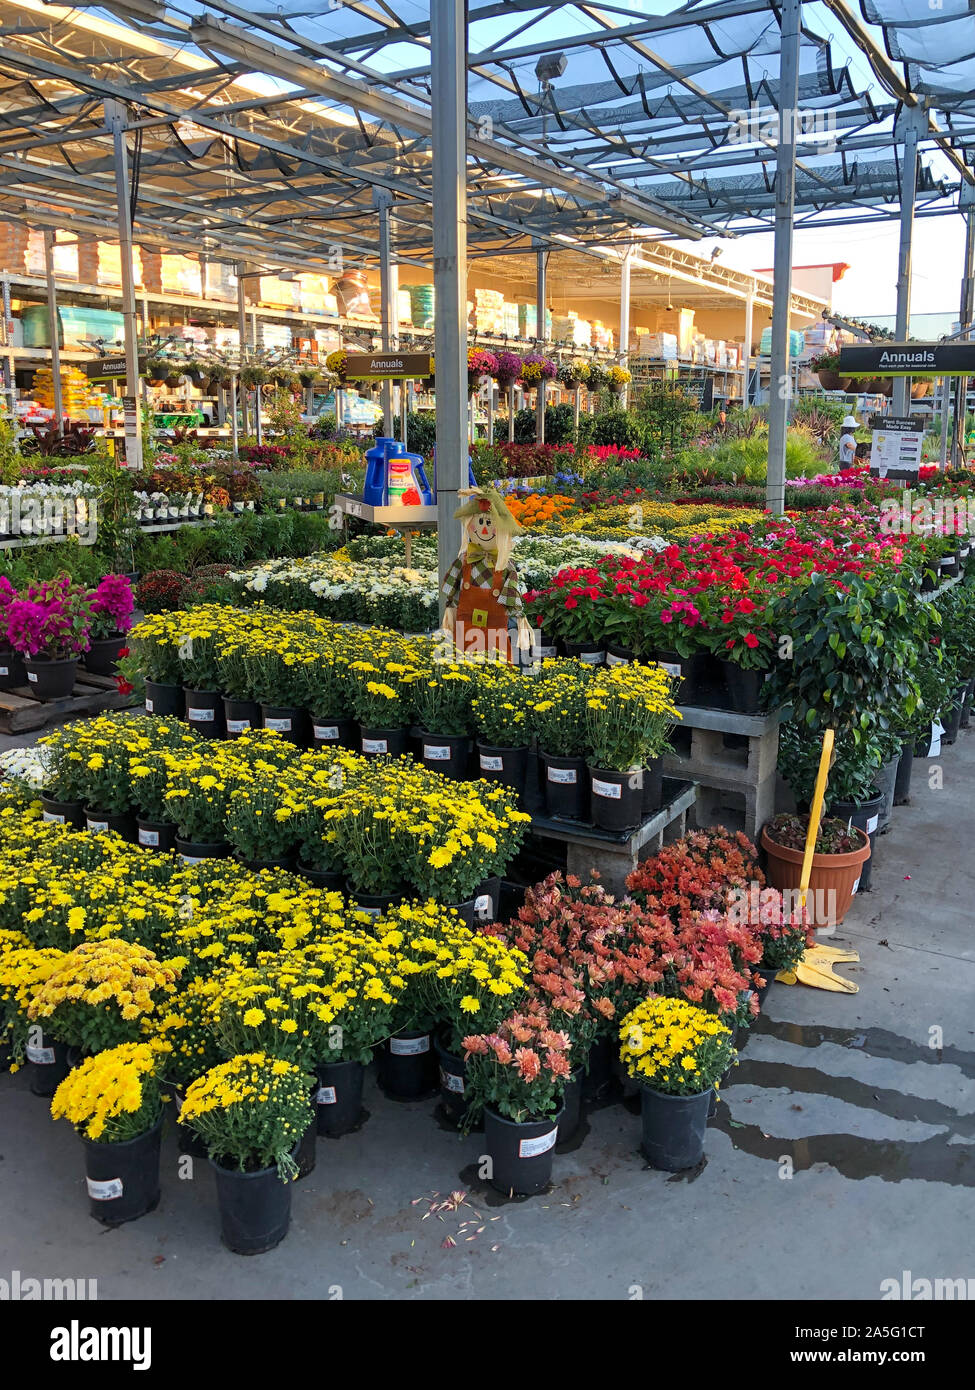 Rows of colorful flowers and plants for sale at a garden nursery at The ...